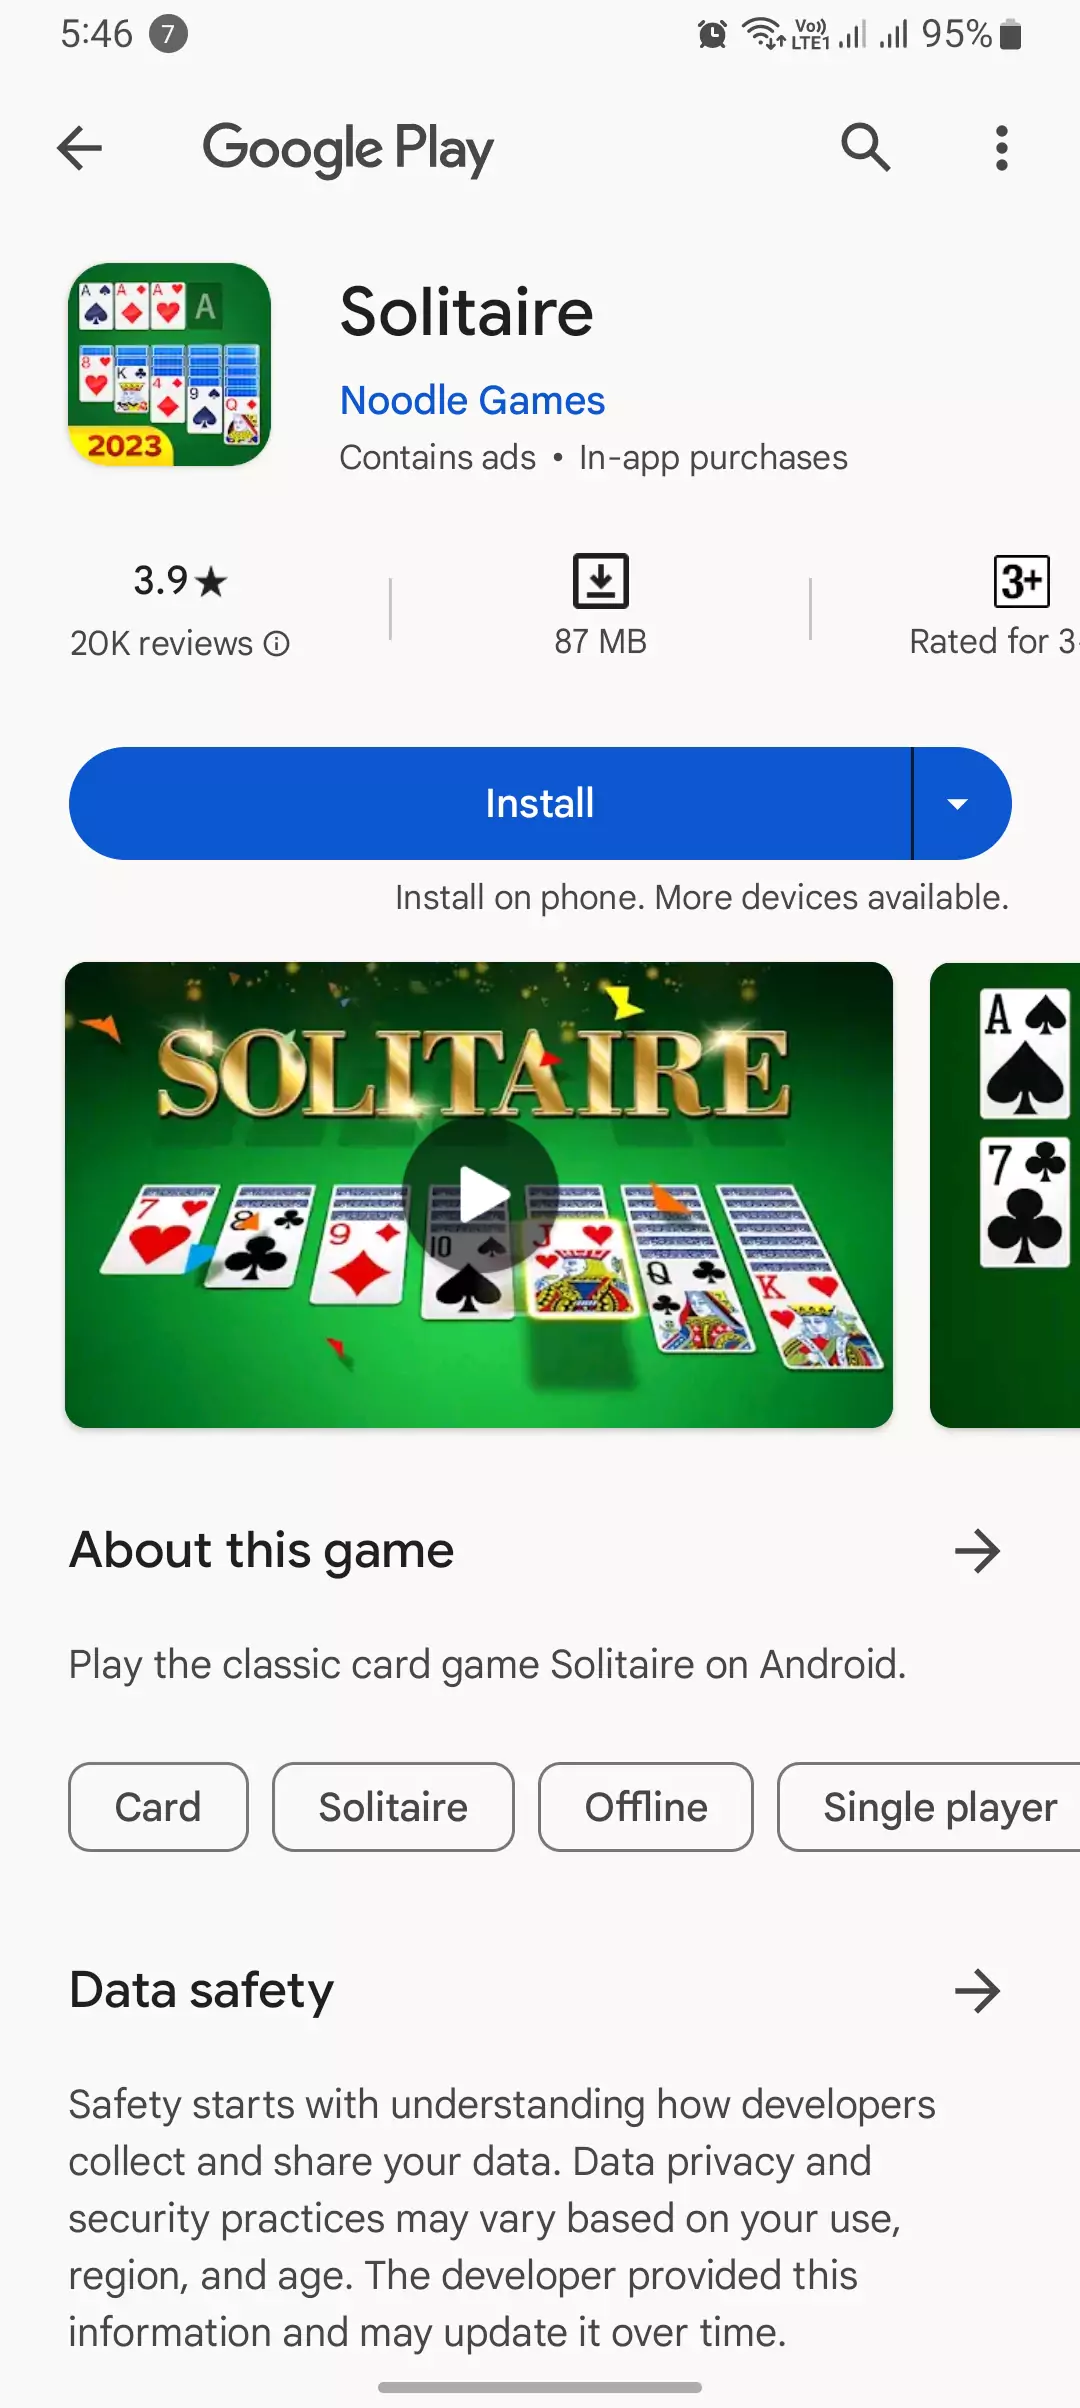 solitaire game by noodle games